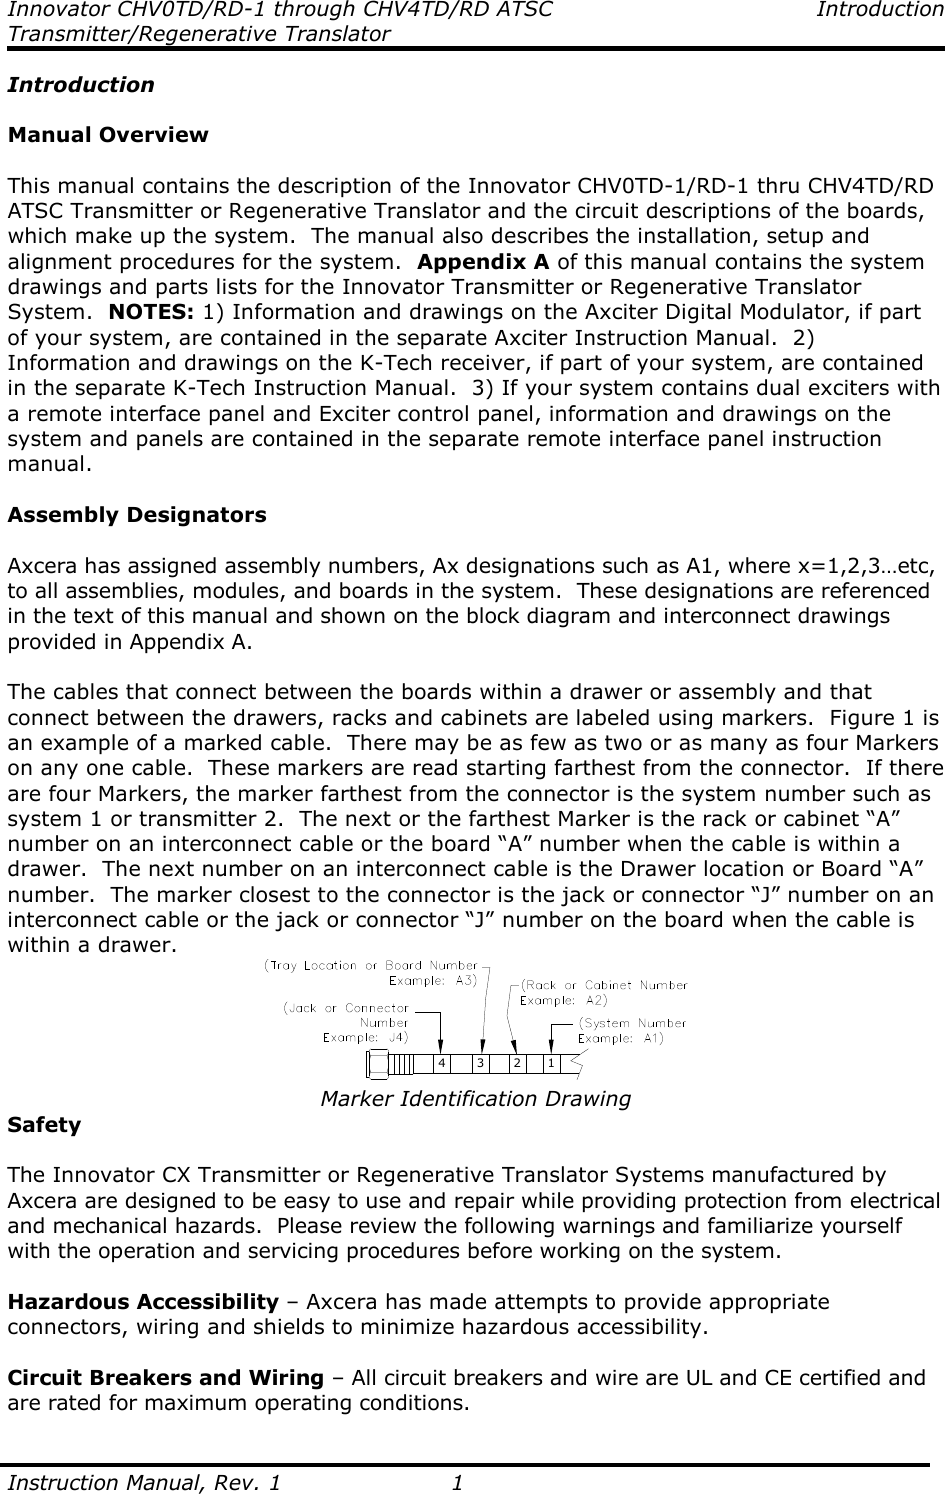 Innovator CHV0TD/RD-1 through CHV4TD/RD ATSC  Introduction Transmitter/Regenerative Translator  Instruction Manual, Rev. 1  1 Introduction  Manual Overview  This manual contains the description of the Innovator CHV0TD-1/RD-1 thru CHV4TD/RD ATSC Transmitter or Regenerative Translator and the circuit descriptions of the boards, which make up the system.  The manual also describes the installation, setup and alignment procedures for the system.  Appendix A of this manual contains the system drawings and parts lists for the Innovator Transmitter or Regenerative Translator System.  NOTES: 1) Information and drawings on the Axciter Digital Modulator, if part of your system, are contained in the separate Axciter Instruction Manual.  2) Information and drawings on the K-Tech receiver, if part of your system, are contained in the separate K-Tech Instruction Manual.  3) If your system contains dual exciters with a remote interface panel and Exciter control panel, information and drawings on the system and panels are contained in the separate remote interface panel instruction manual.    Assembly Designators  Axcera has assigned assembly numbers, Ax designations such as A1, where x=1,2,3…etc, to all assemblies, modules, and boards in the system.  These designations are referenced in the text of this manual and shown on the block diagram and interconnect drawings provided in Appendix A.  The cables that connect between the boards within a drawer or assembly and that connect between the drawers, racks and cabinets are labeled using markers.  Figure 1 is an example of a marked cable.  There may be as few as two or as many as four Markers on any one cable.  These markers are read starting farthest from the connector.  If there are four Markers, the marker farthest from the connector is the system number such as system 1 or transmitter 2.  The next or the farthest Marker is the rack or cabinet “A” number on an interconnect cable or the board “A” number when the cable is within a drawer.  The next number on an interconnect cable is the Drawer location or Board “A” number.  The marker closest to the connector is the jack or connector “J” number on an interconnect cable or the jack or connector “J” number on the board when the cable is within a drawer. 4 3 2 1 Marker Identification Drawing Safety  The Innovator CX Transmitter or Regenerative Translator Systems manufactured by Axcera are designed to be easy to use and repair while providing protection from electrical and mechanical hazards.  Please review the following warnings and familiarize yourself with the operation and servicing procedures before working on the system.  Hazardous Accessibility – Axcera has made attempts to provide appropriate connectors, wiring and shields to minimize hazardous accessibility.  Circuit Breakers and Wiring – All circuit breakers and wire are UL and CE certified and are rated for maximum operating conditions.  